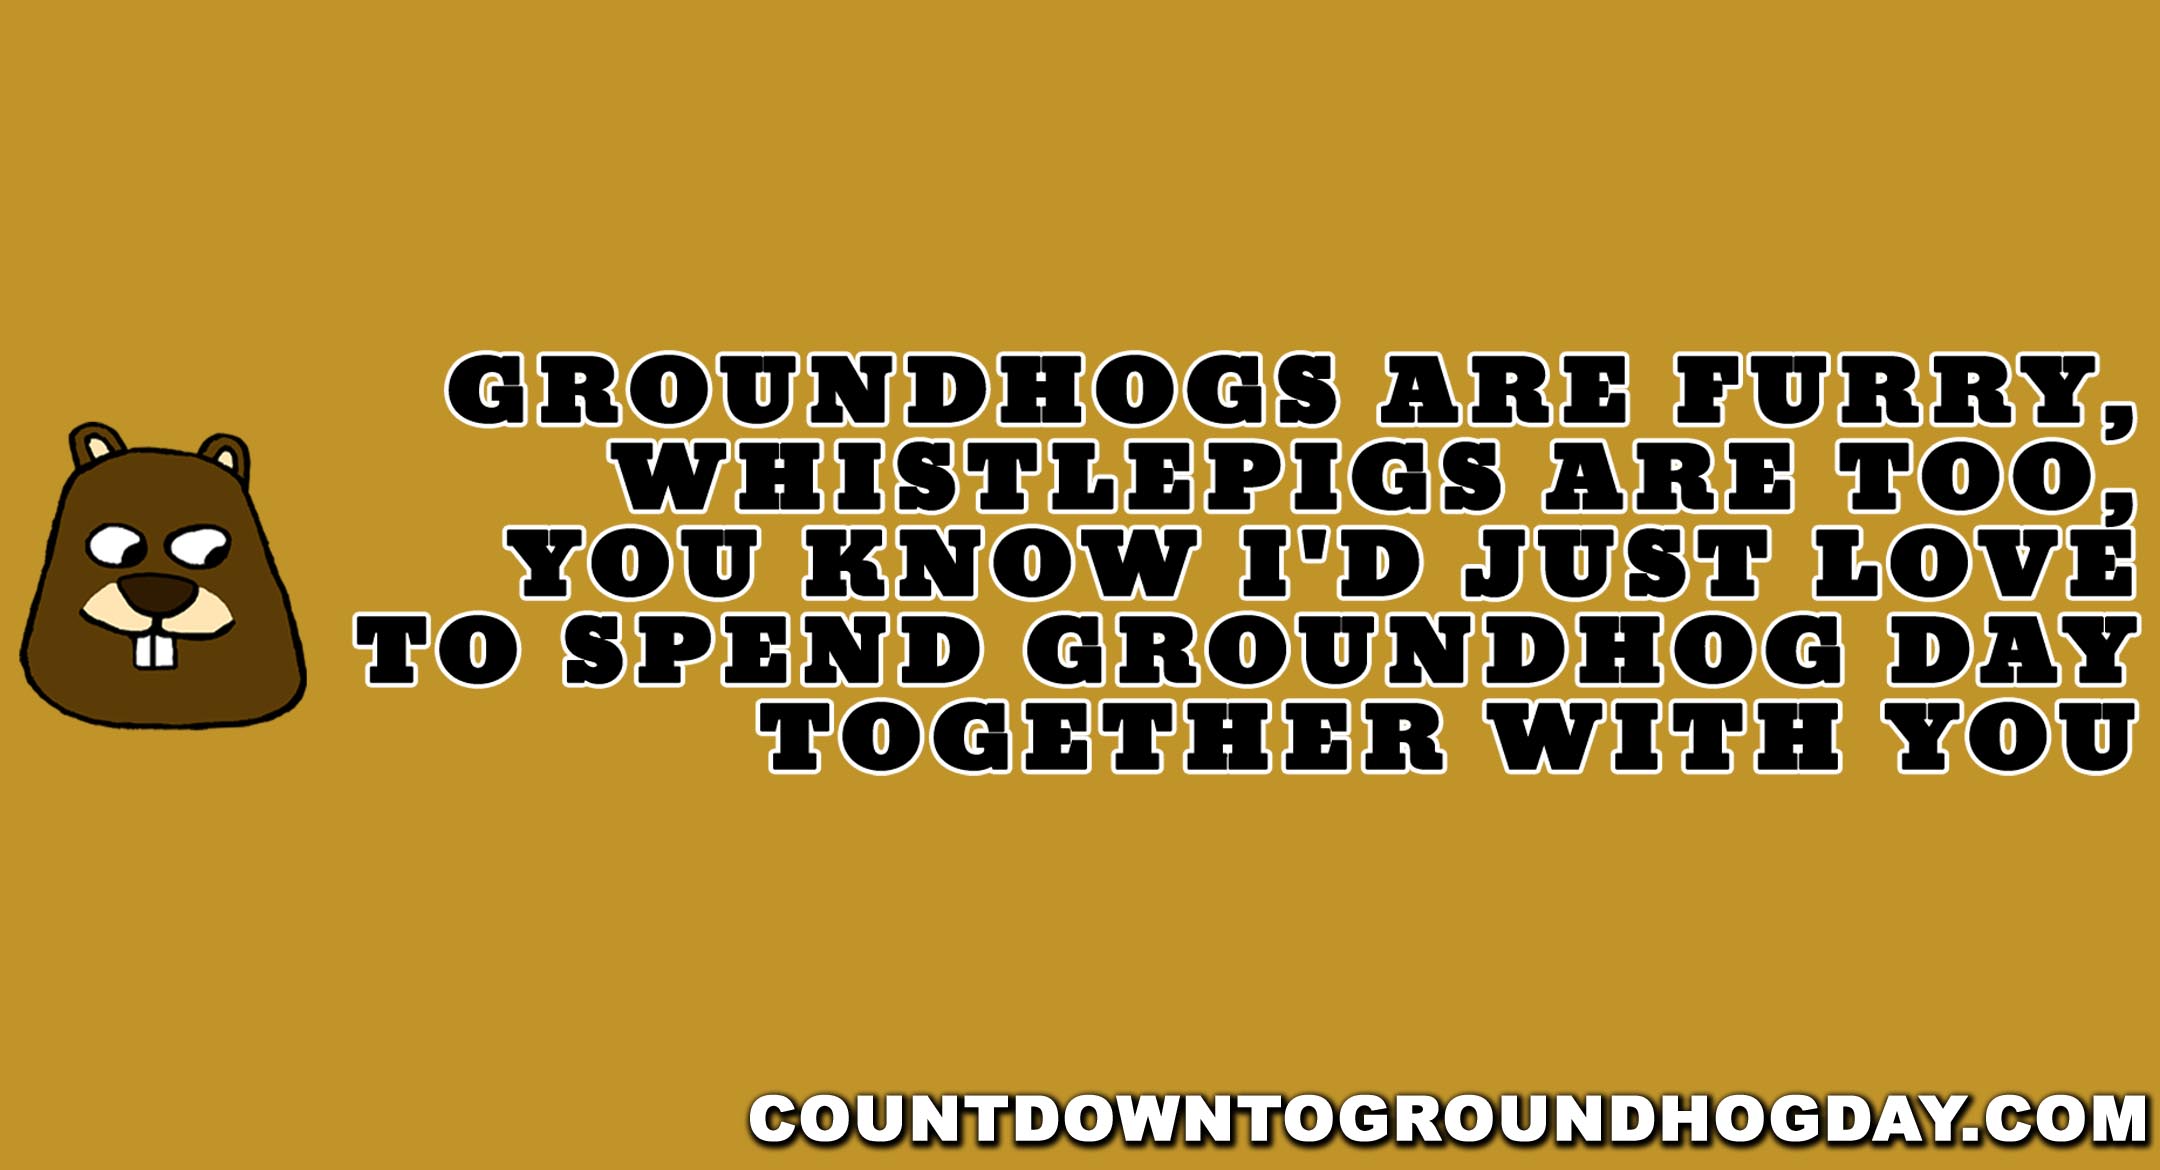 Groundhogs are furry, whistlepigs are too...